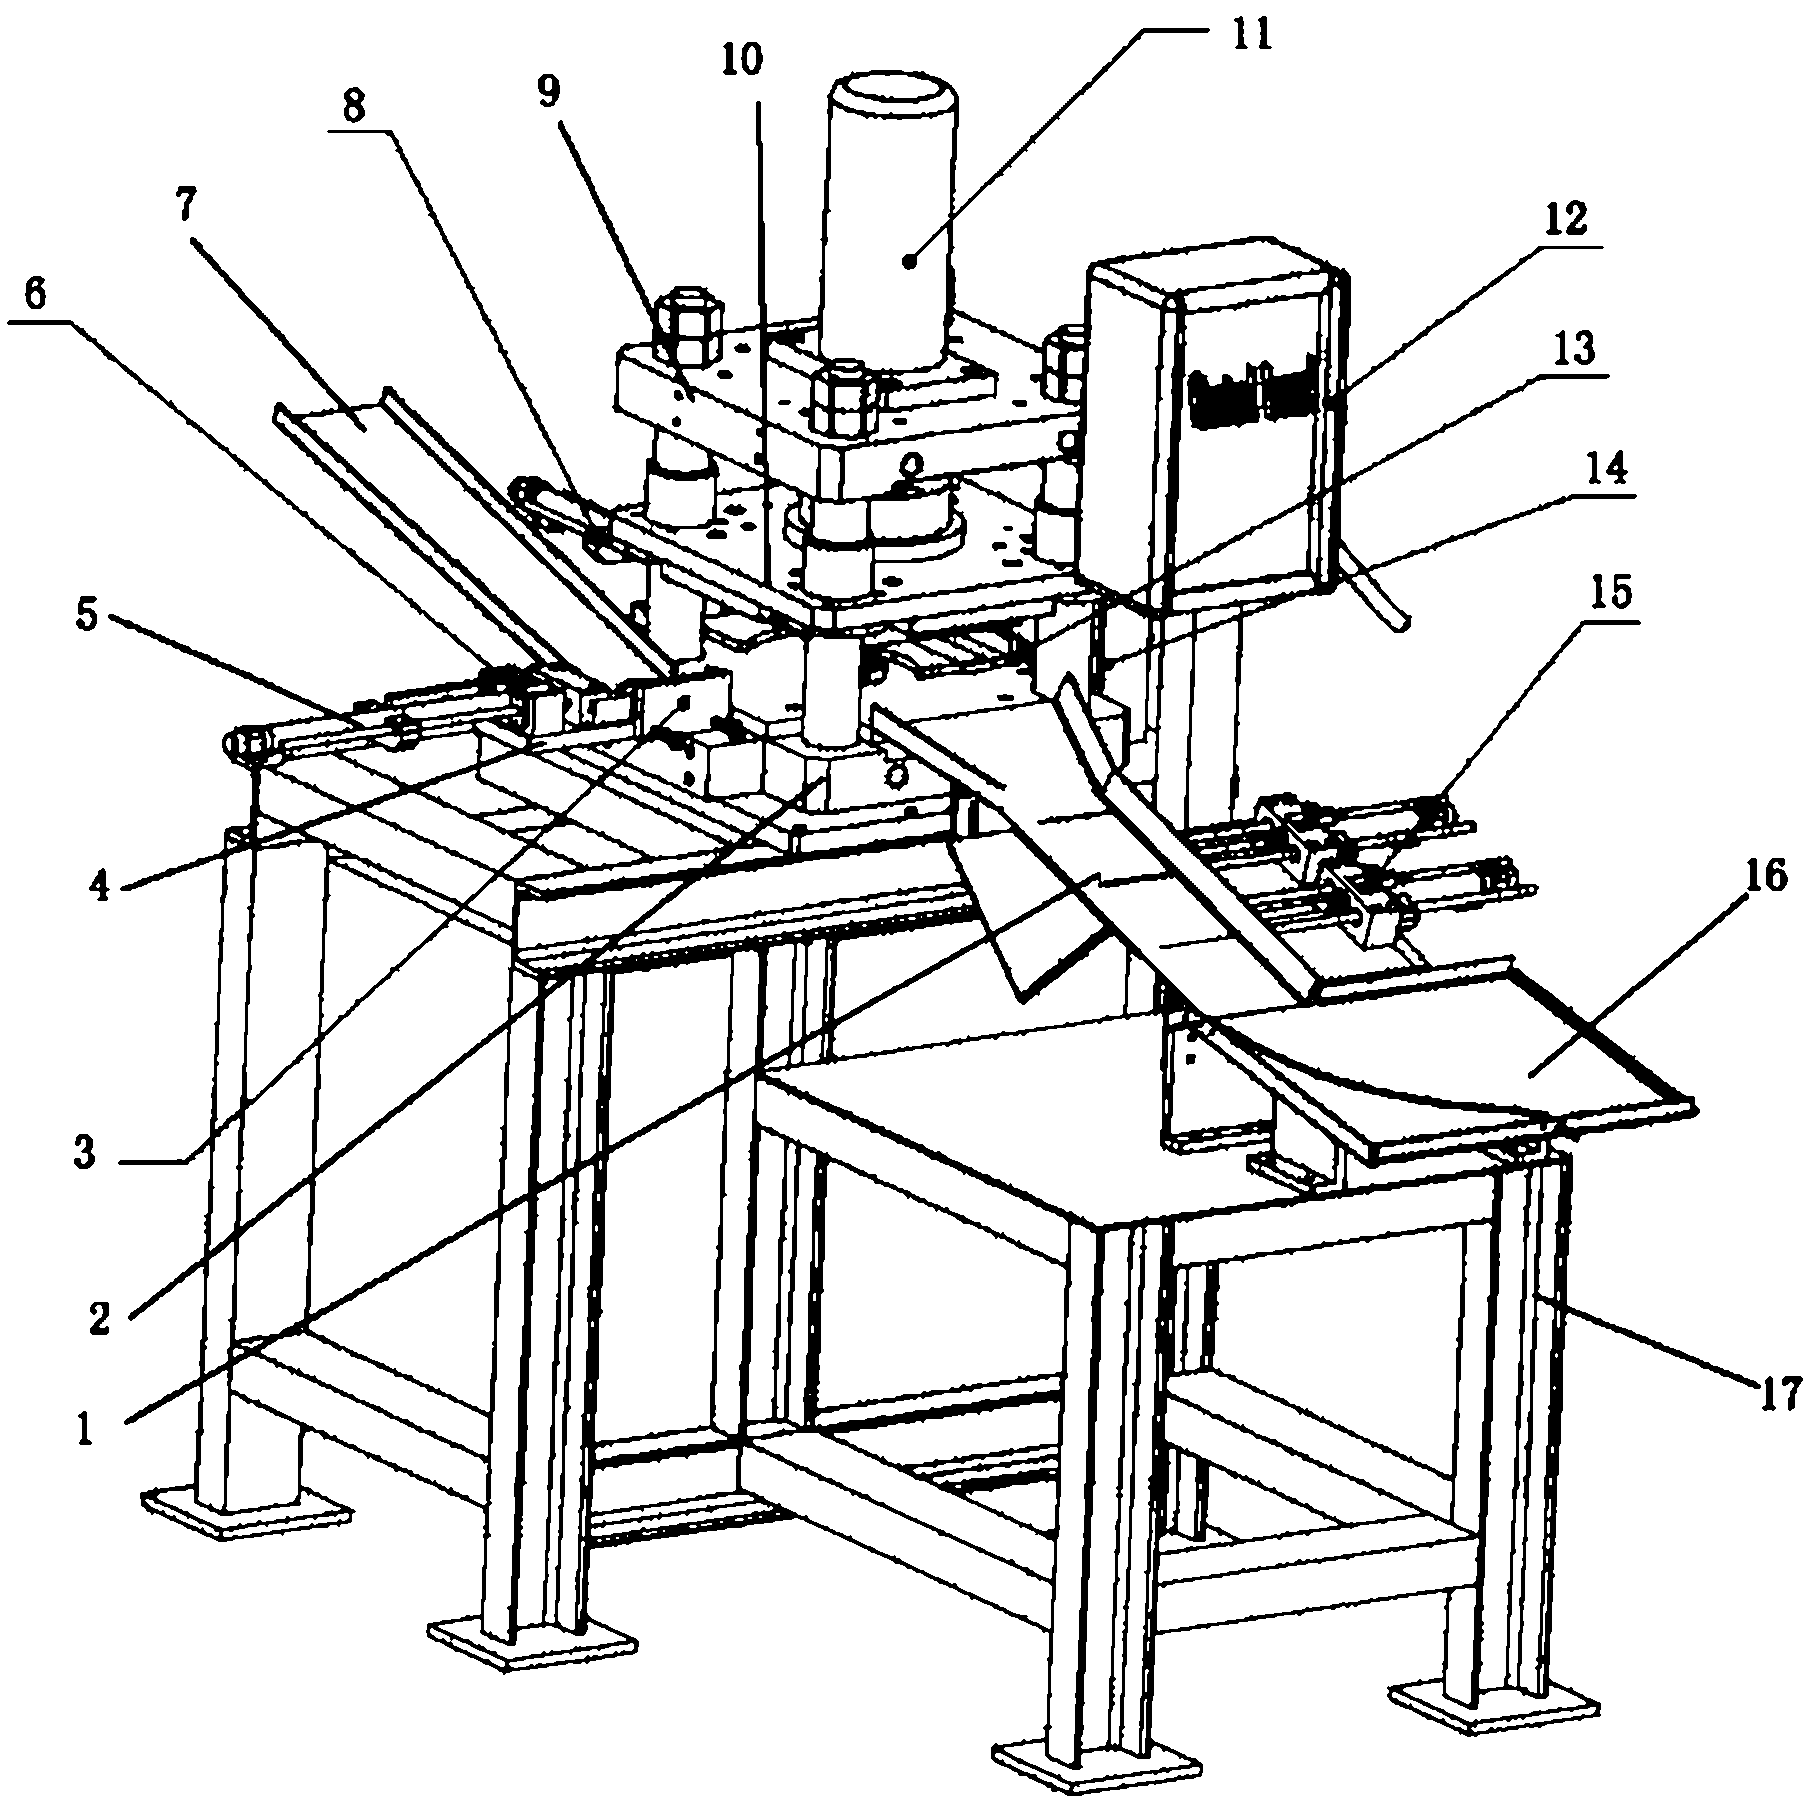 Automatic pressing and detecting machine for iron cores